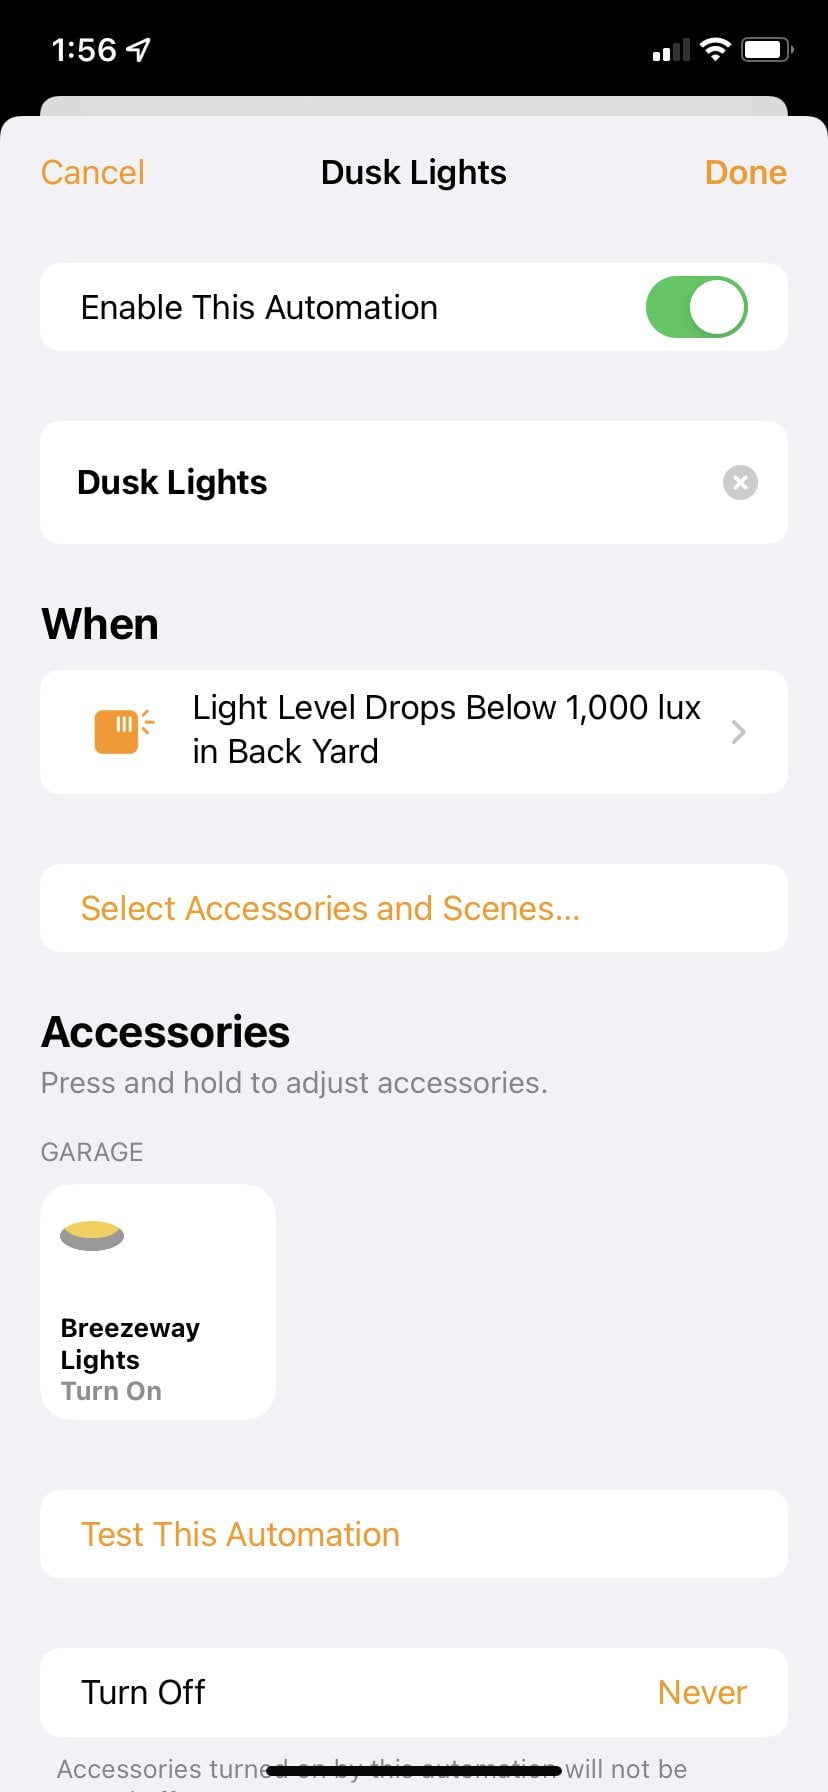 Does Eves Automation Override Home Automation Luxury settings for Dusk